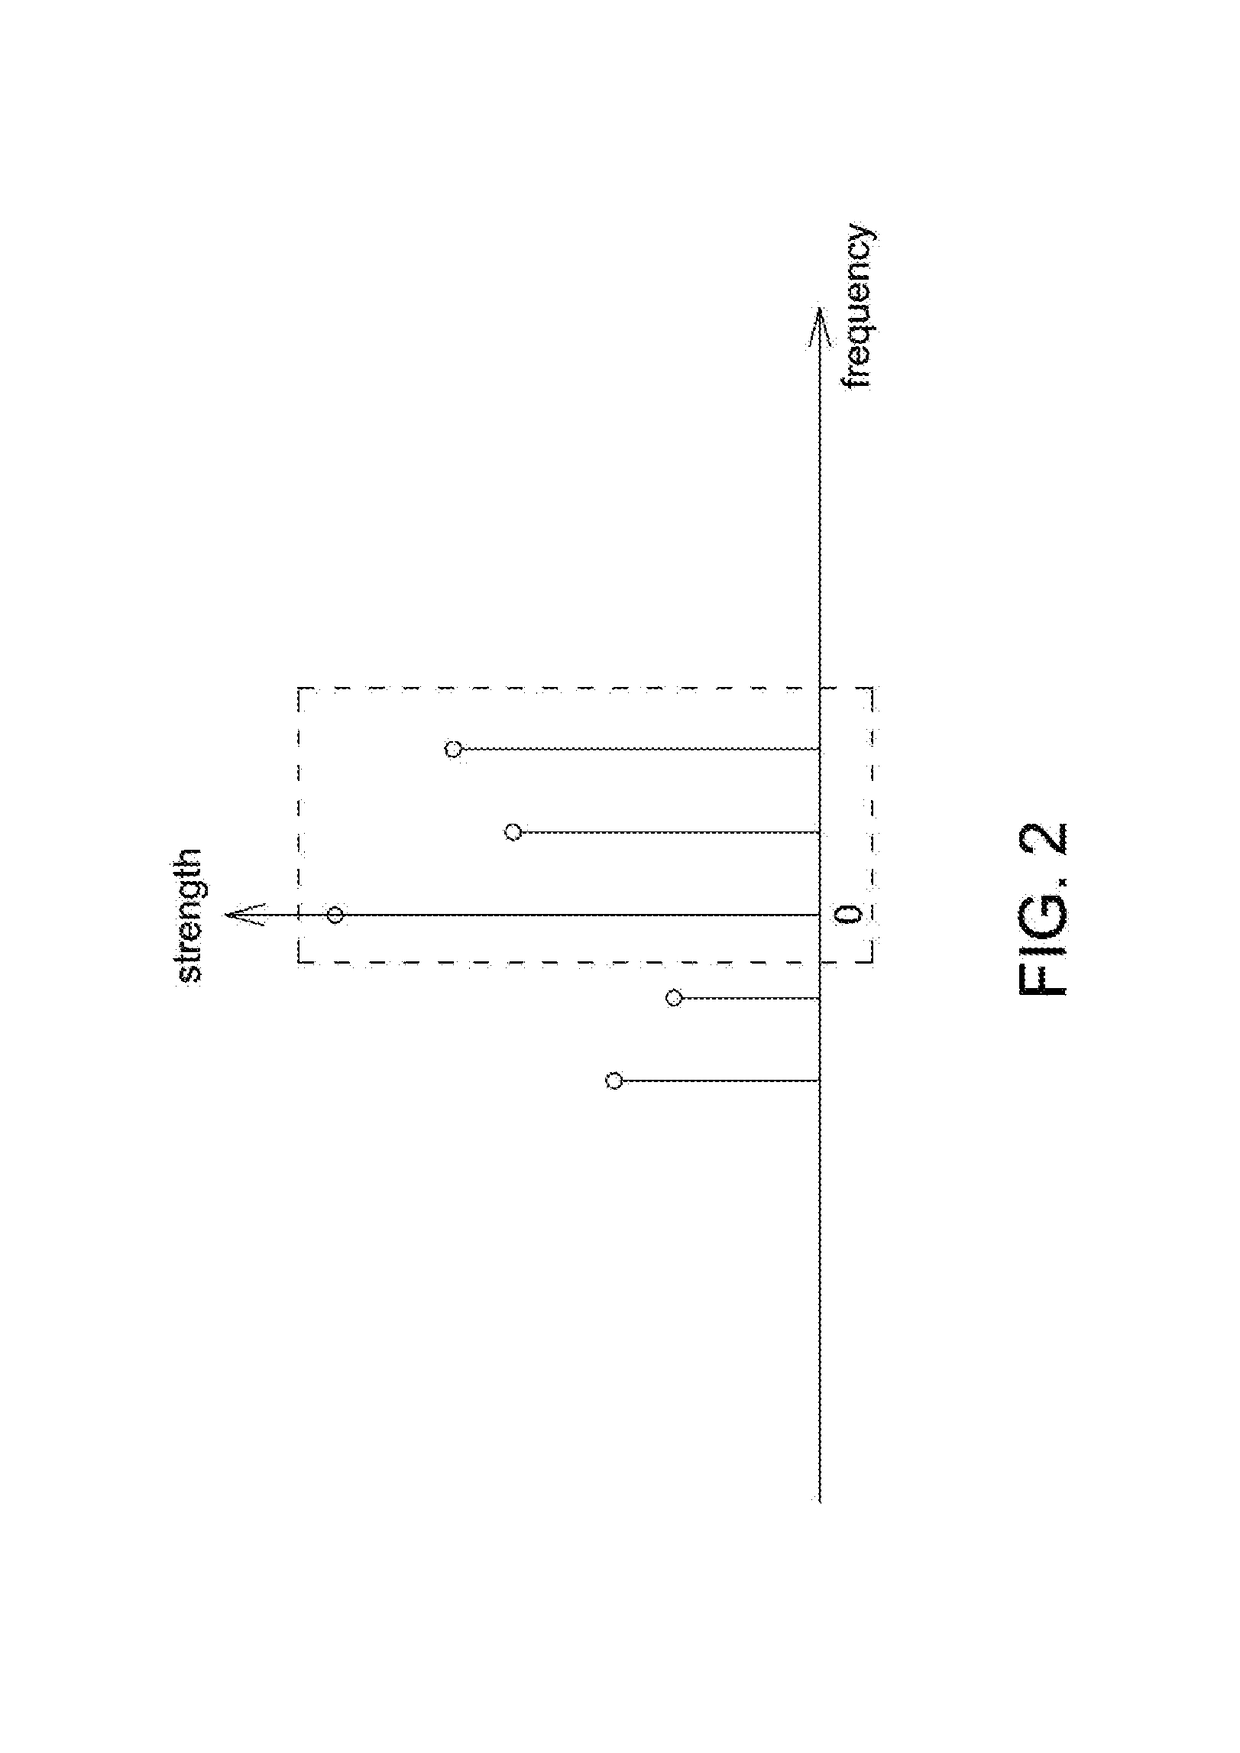 Audiovisual signal processing circuit and associated television signal processing method